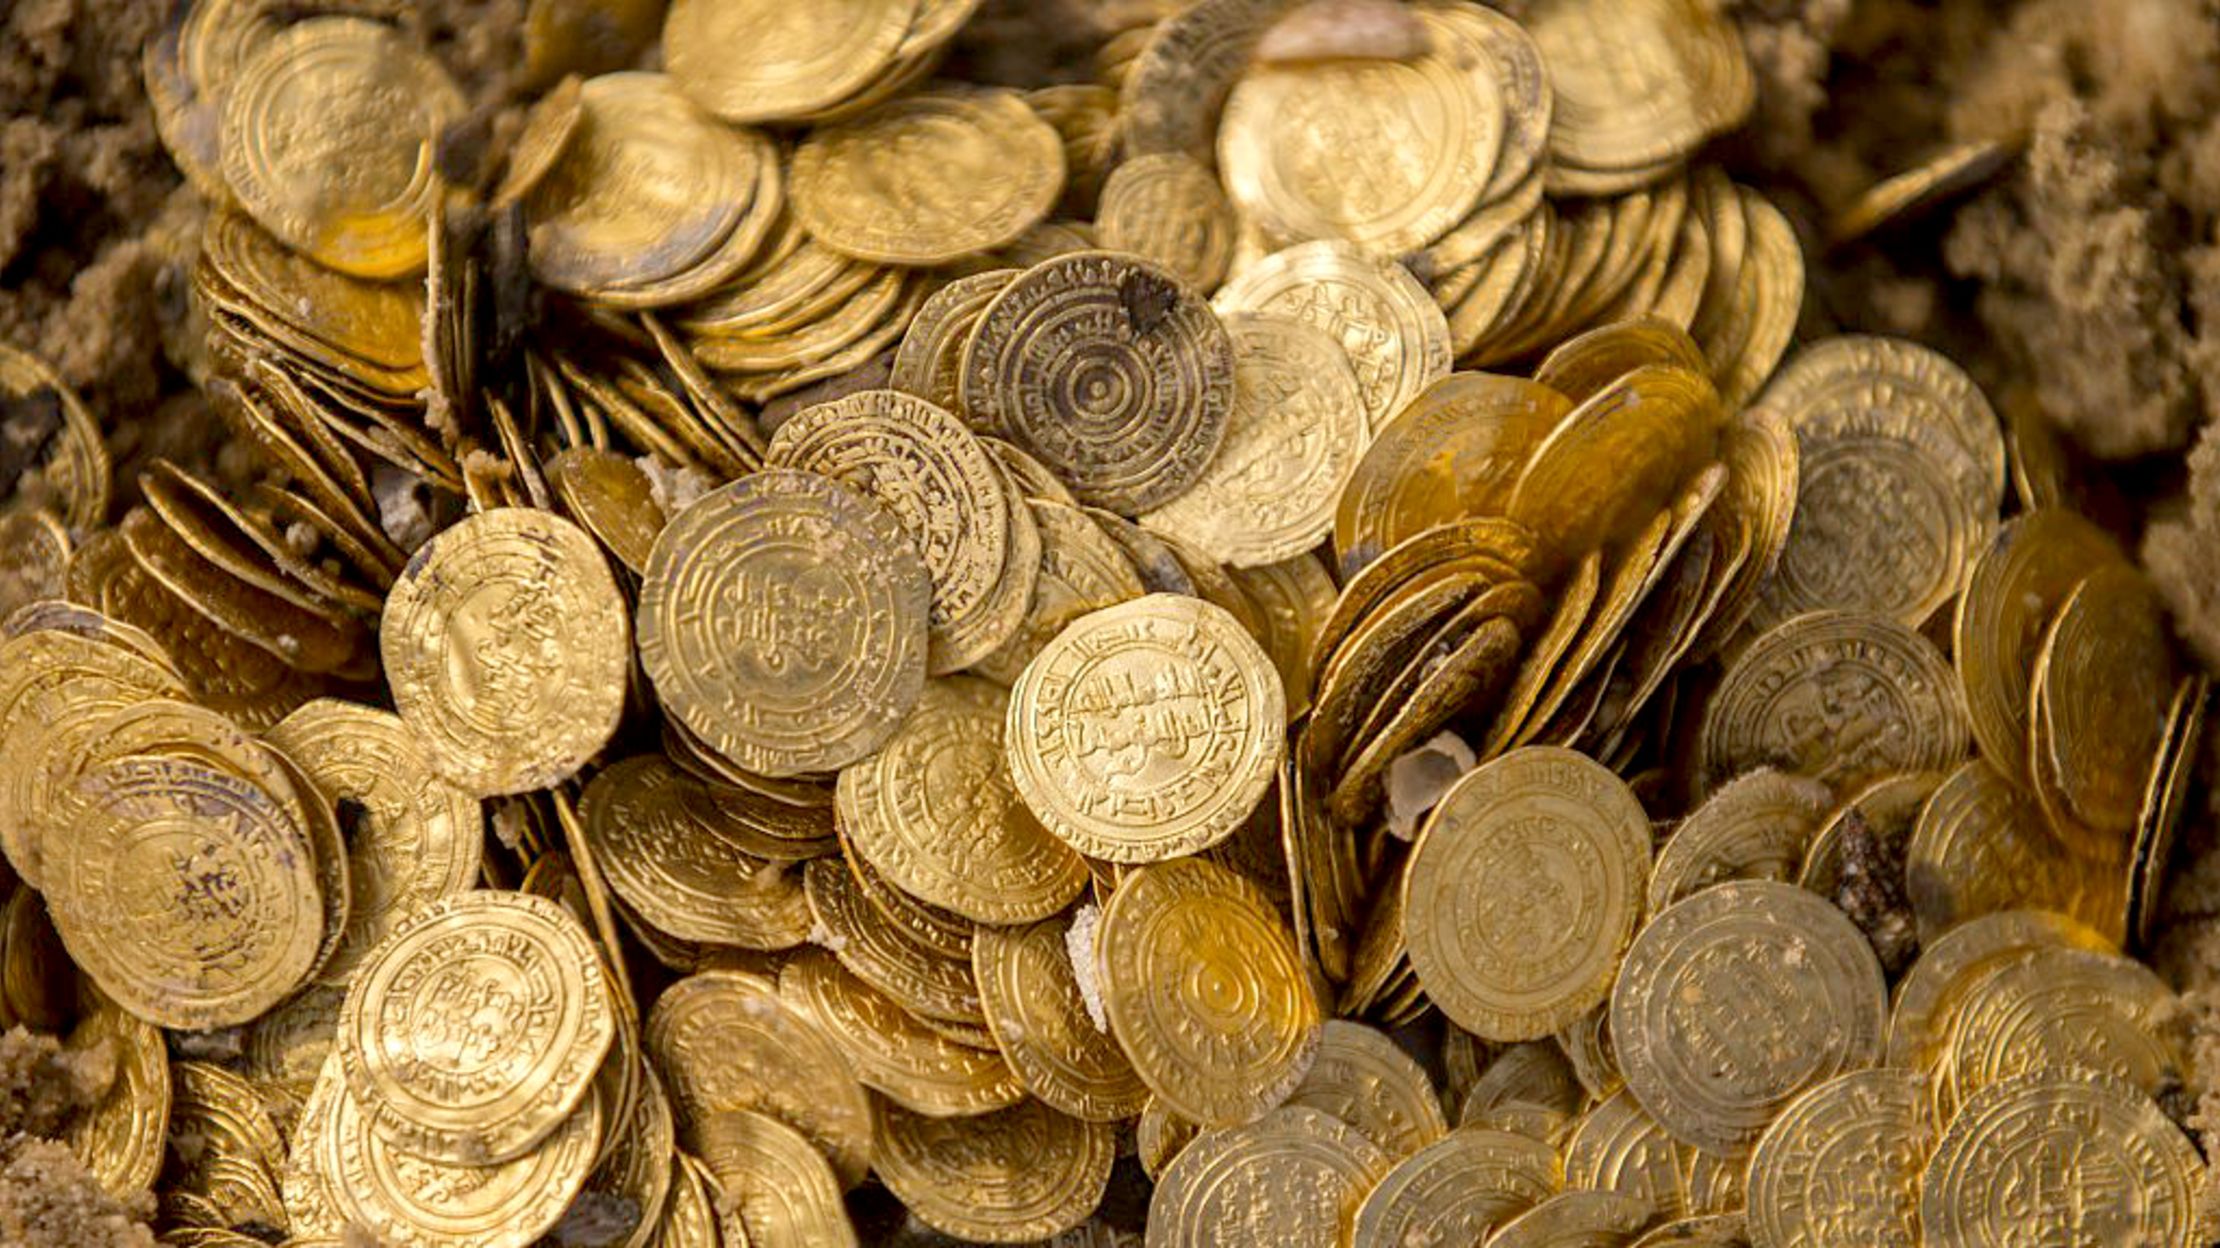 12 Most Amazing and Expensive Treasure Discoveries